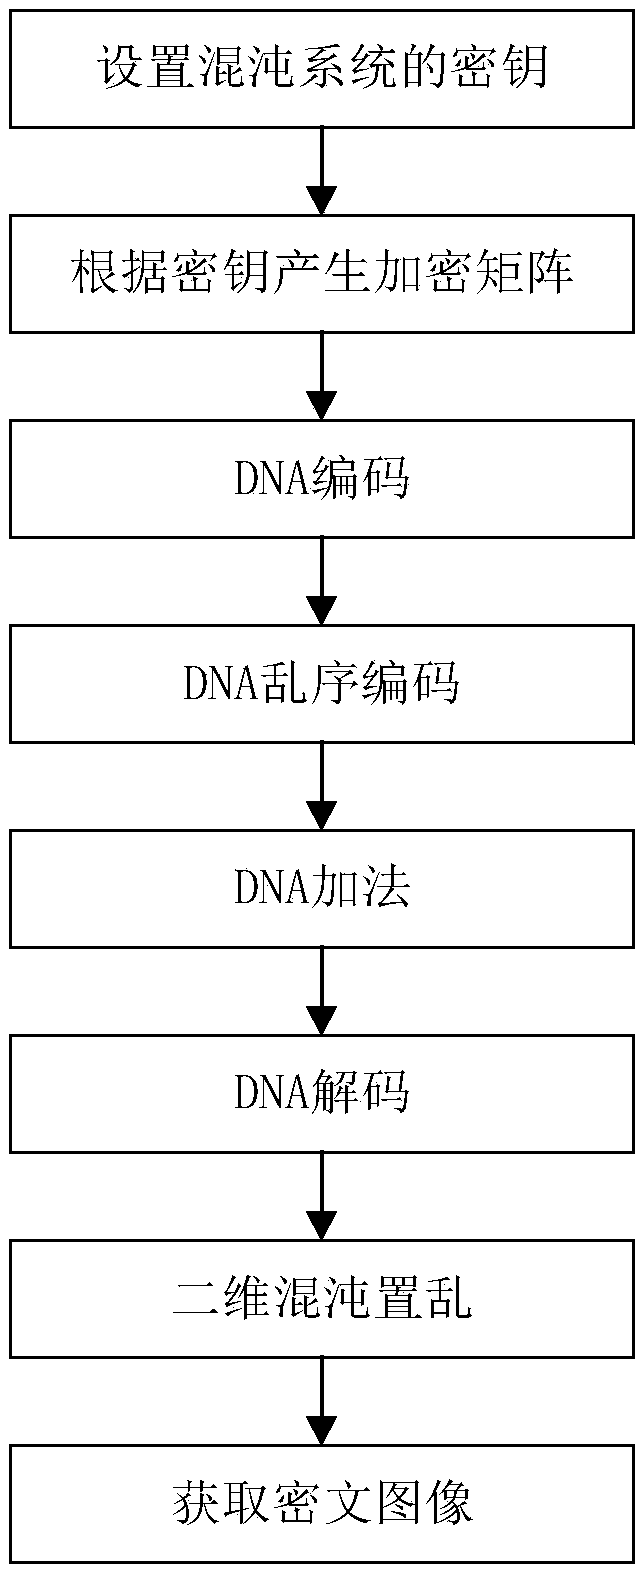 Image encryption and decryption method employing DNA scrambling coding and chaotic mapping